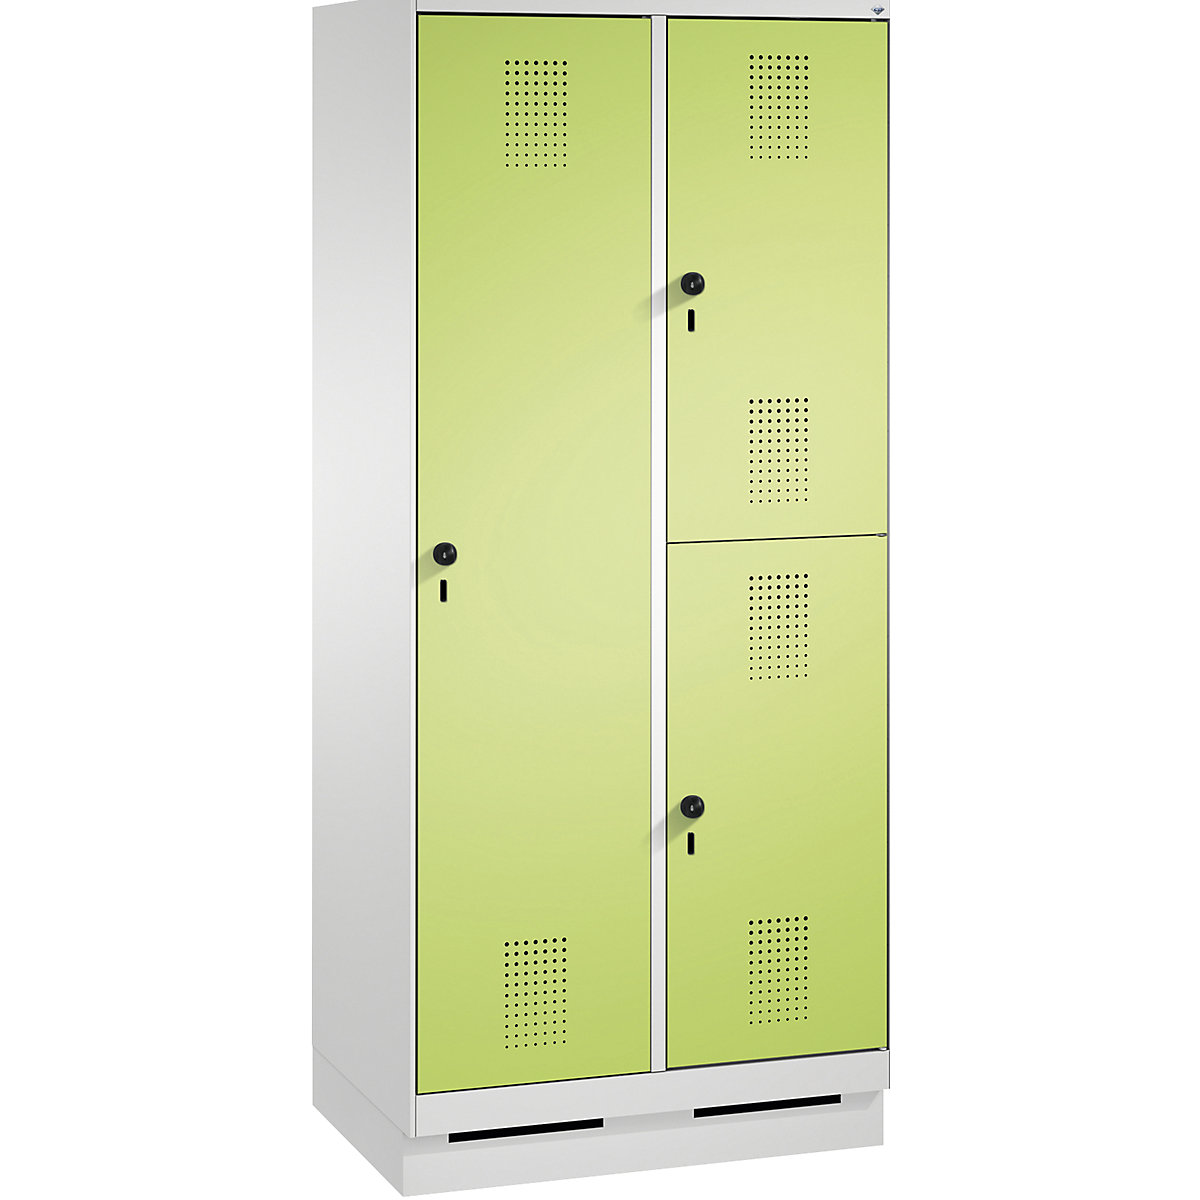 EVOLO combination cupboard, single and double tier – C+P, 2 compartments, 3 doors, compartment width 400 mm, with plinth, light grey / viridian green